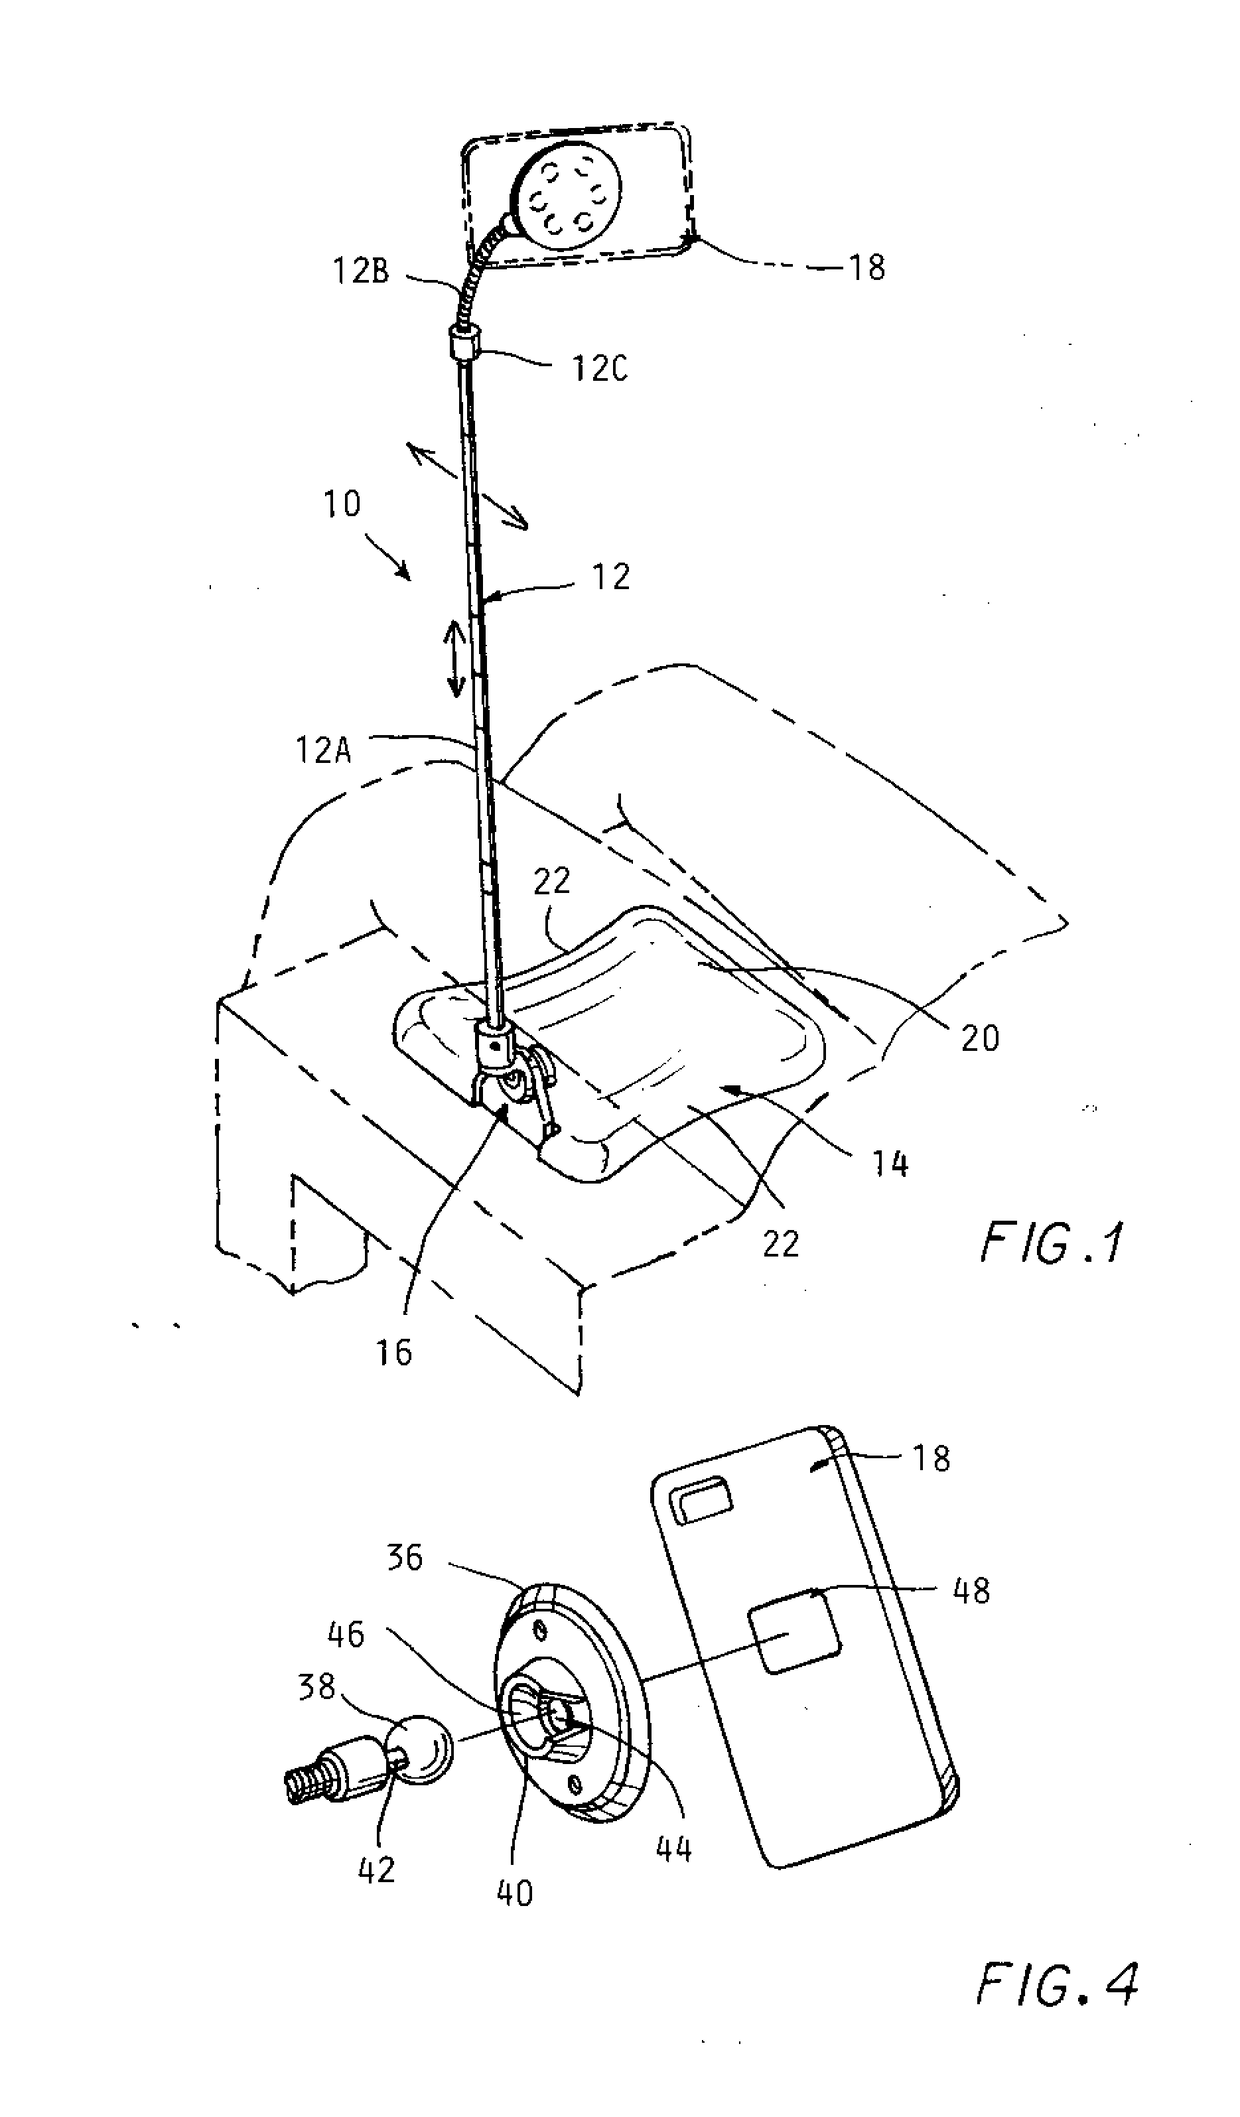 Elevating Support For Viewing Electronic Displays